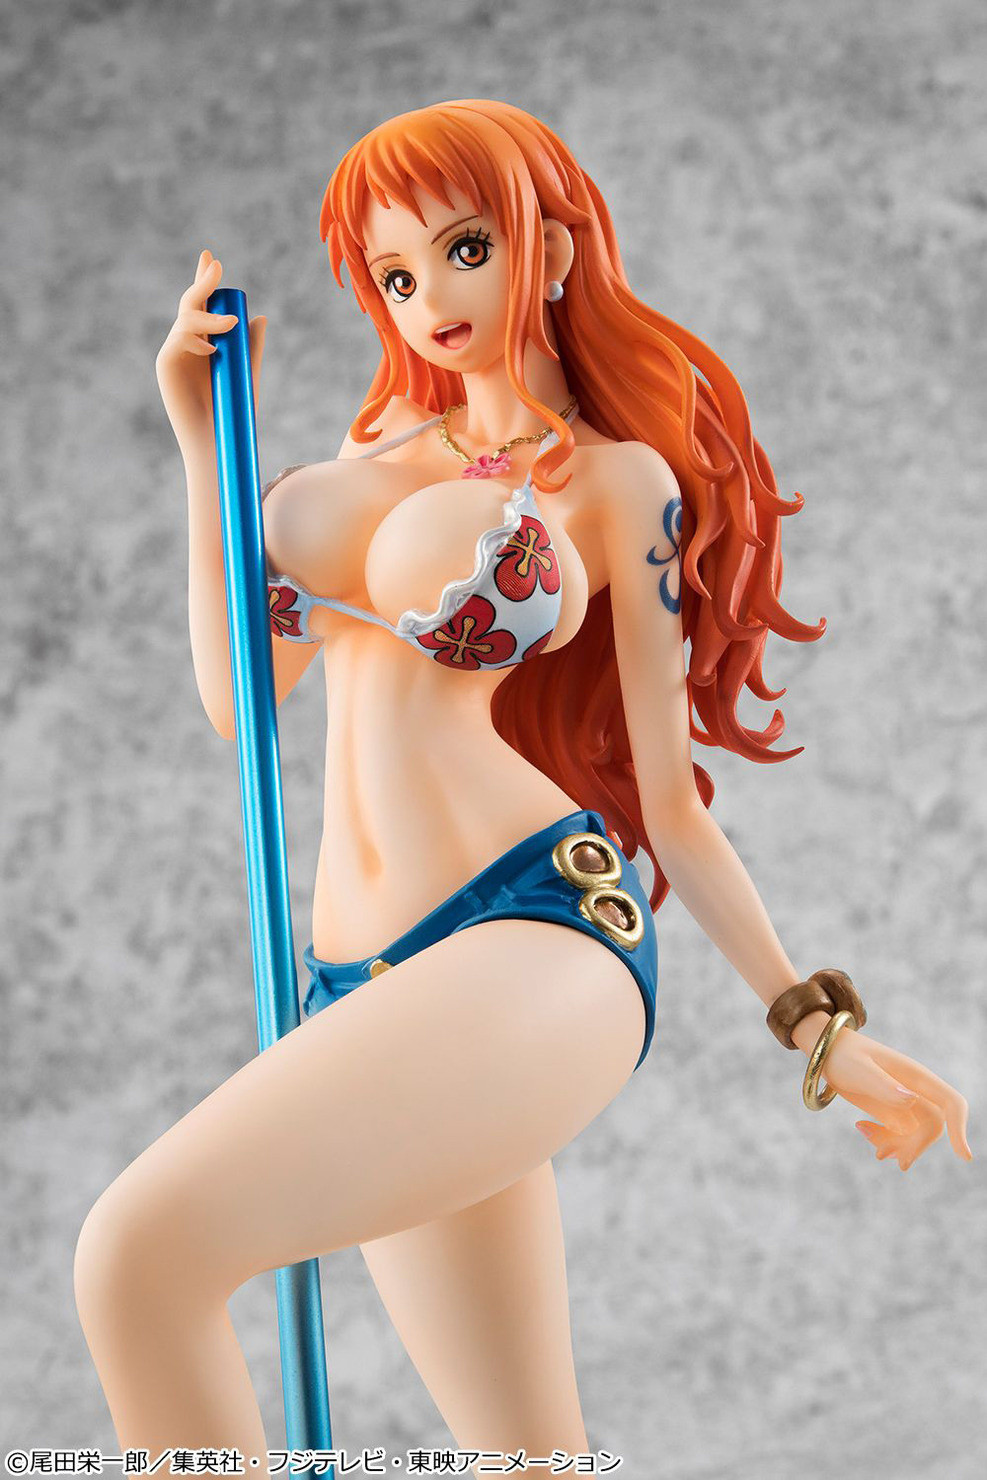 Nami Posed With Clima-Tact for New One Piece P.O.P Figure! 